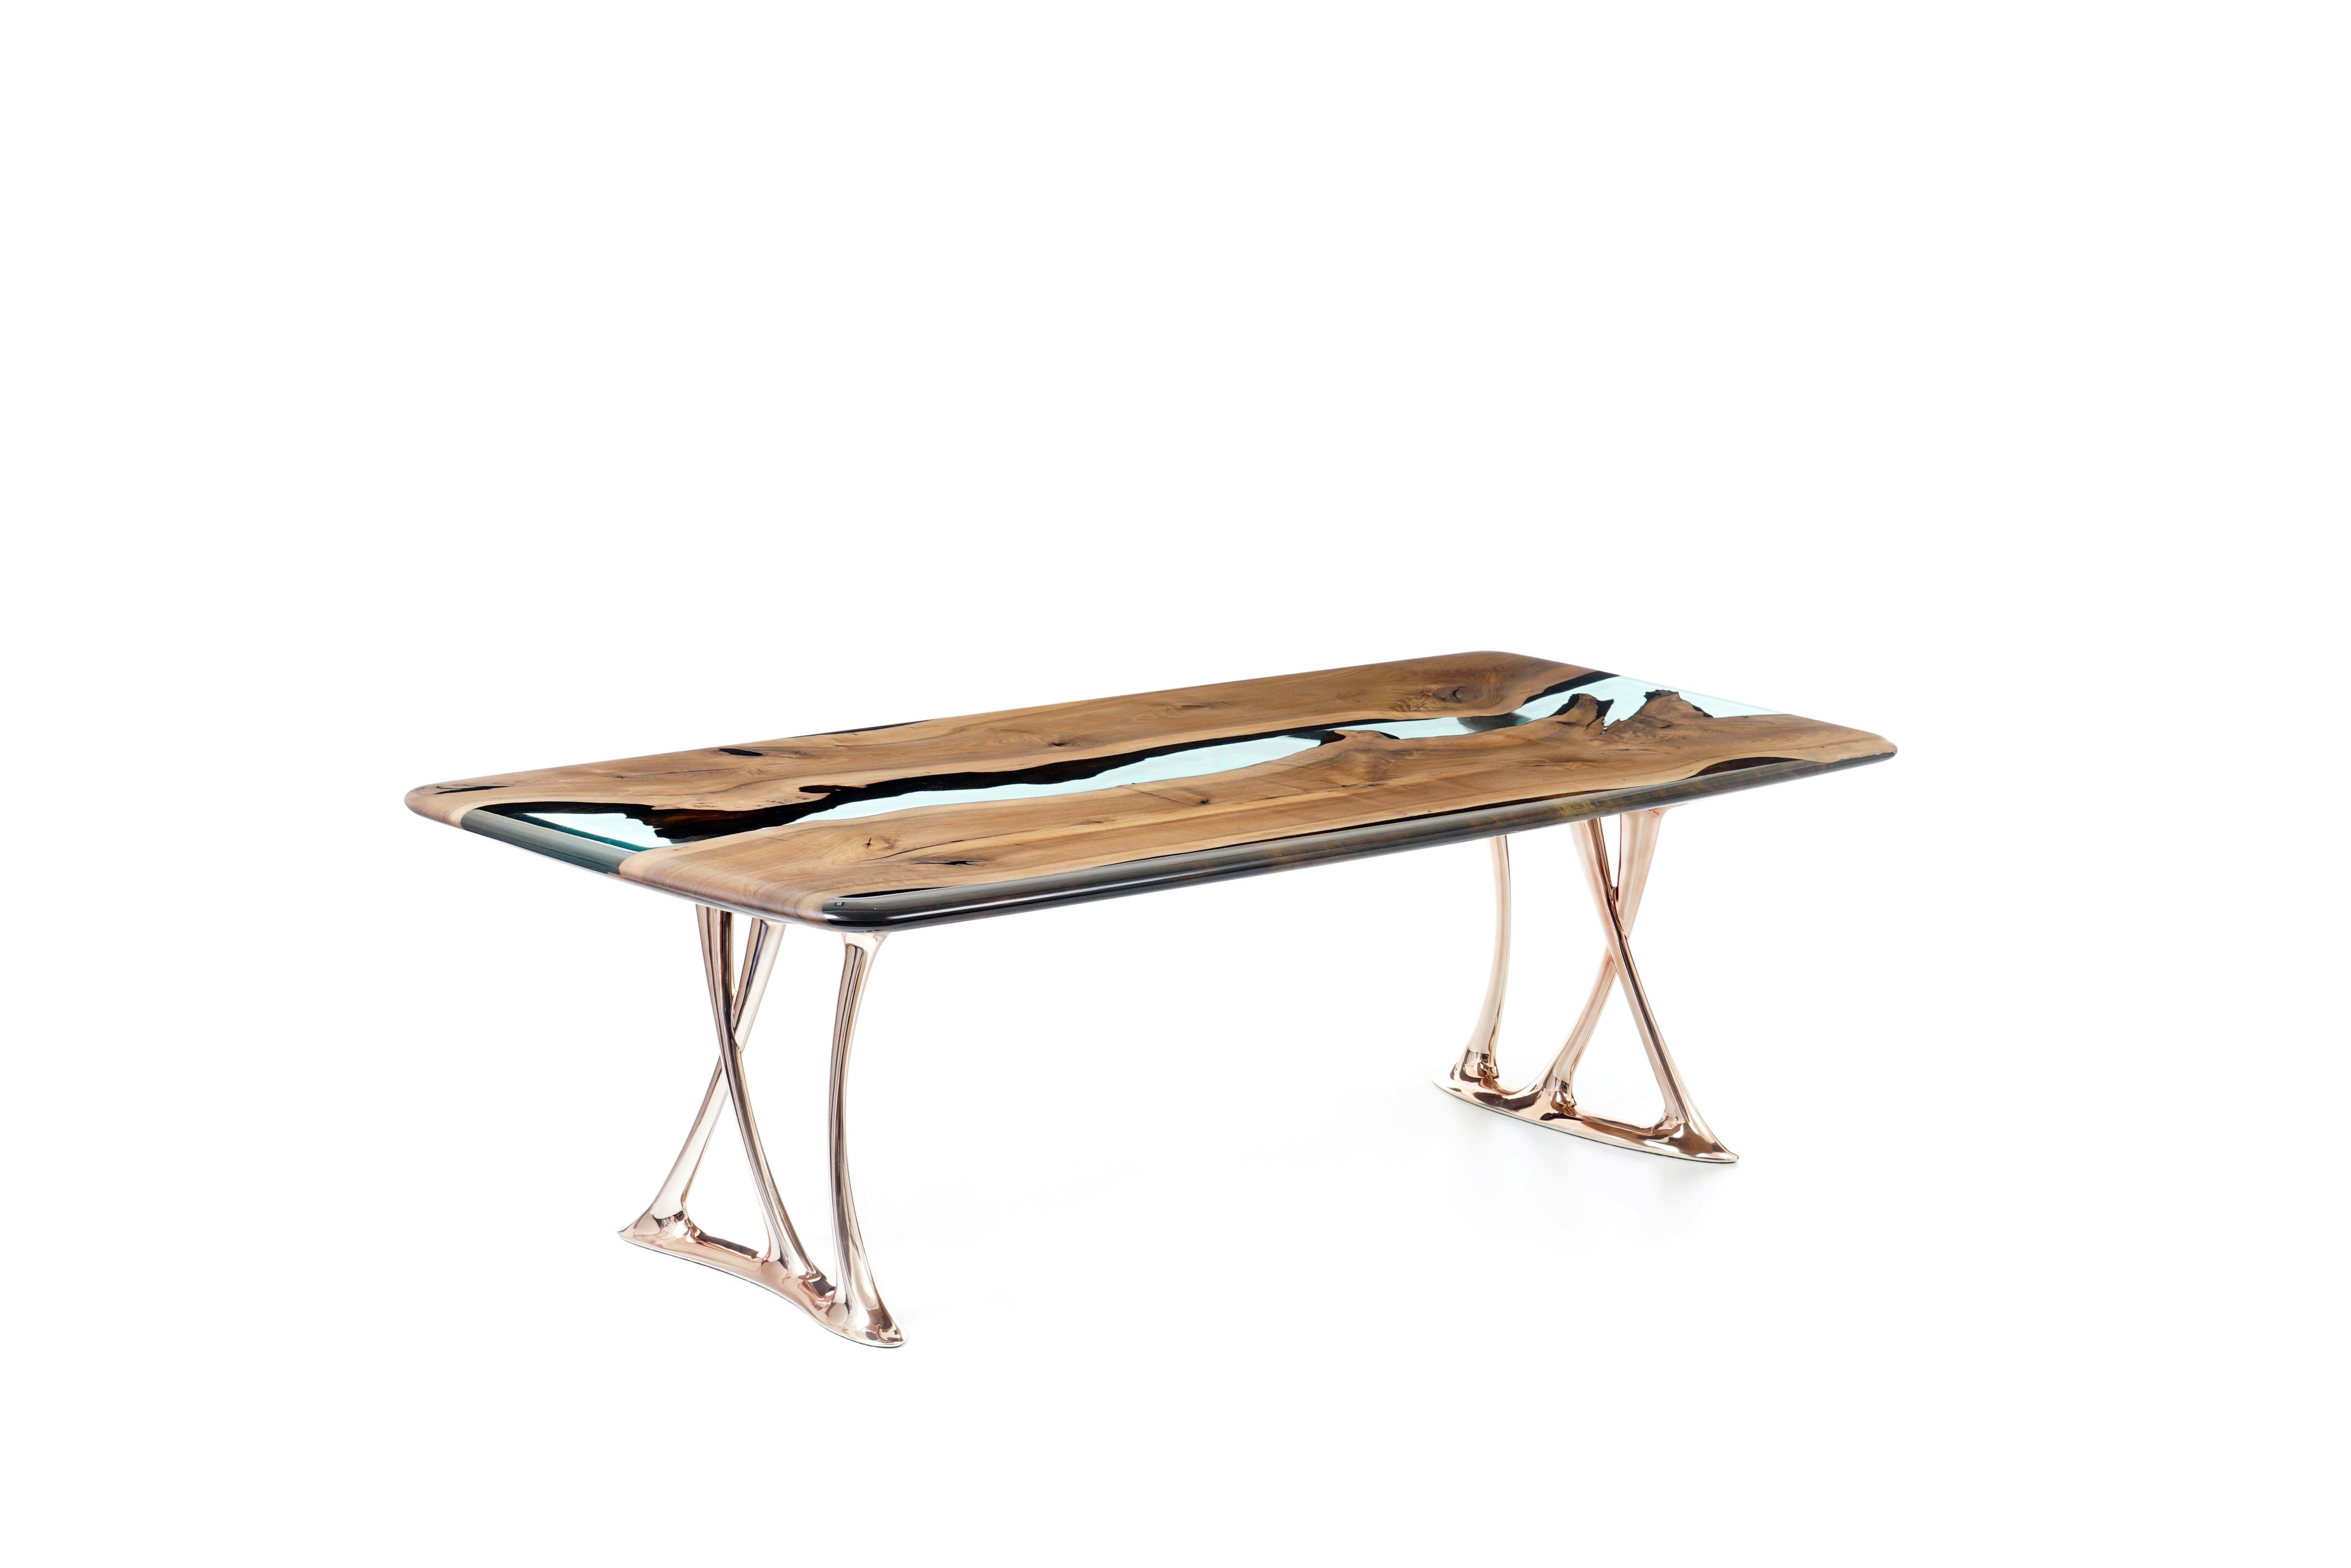 Enhance your dining experience with the exquisite Medma Dining Table, a meticulously crafted masterpiece made from the finest walnut wood with elegant gold-plated aluminum legs. 

This magnificent piece of furniture is designed to make a bold